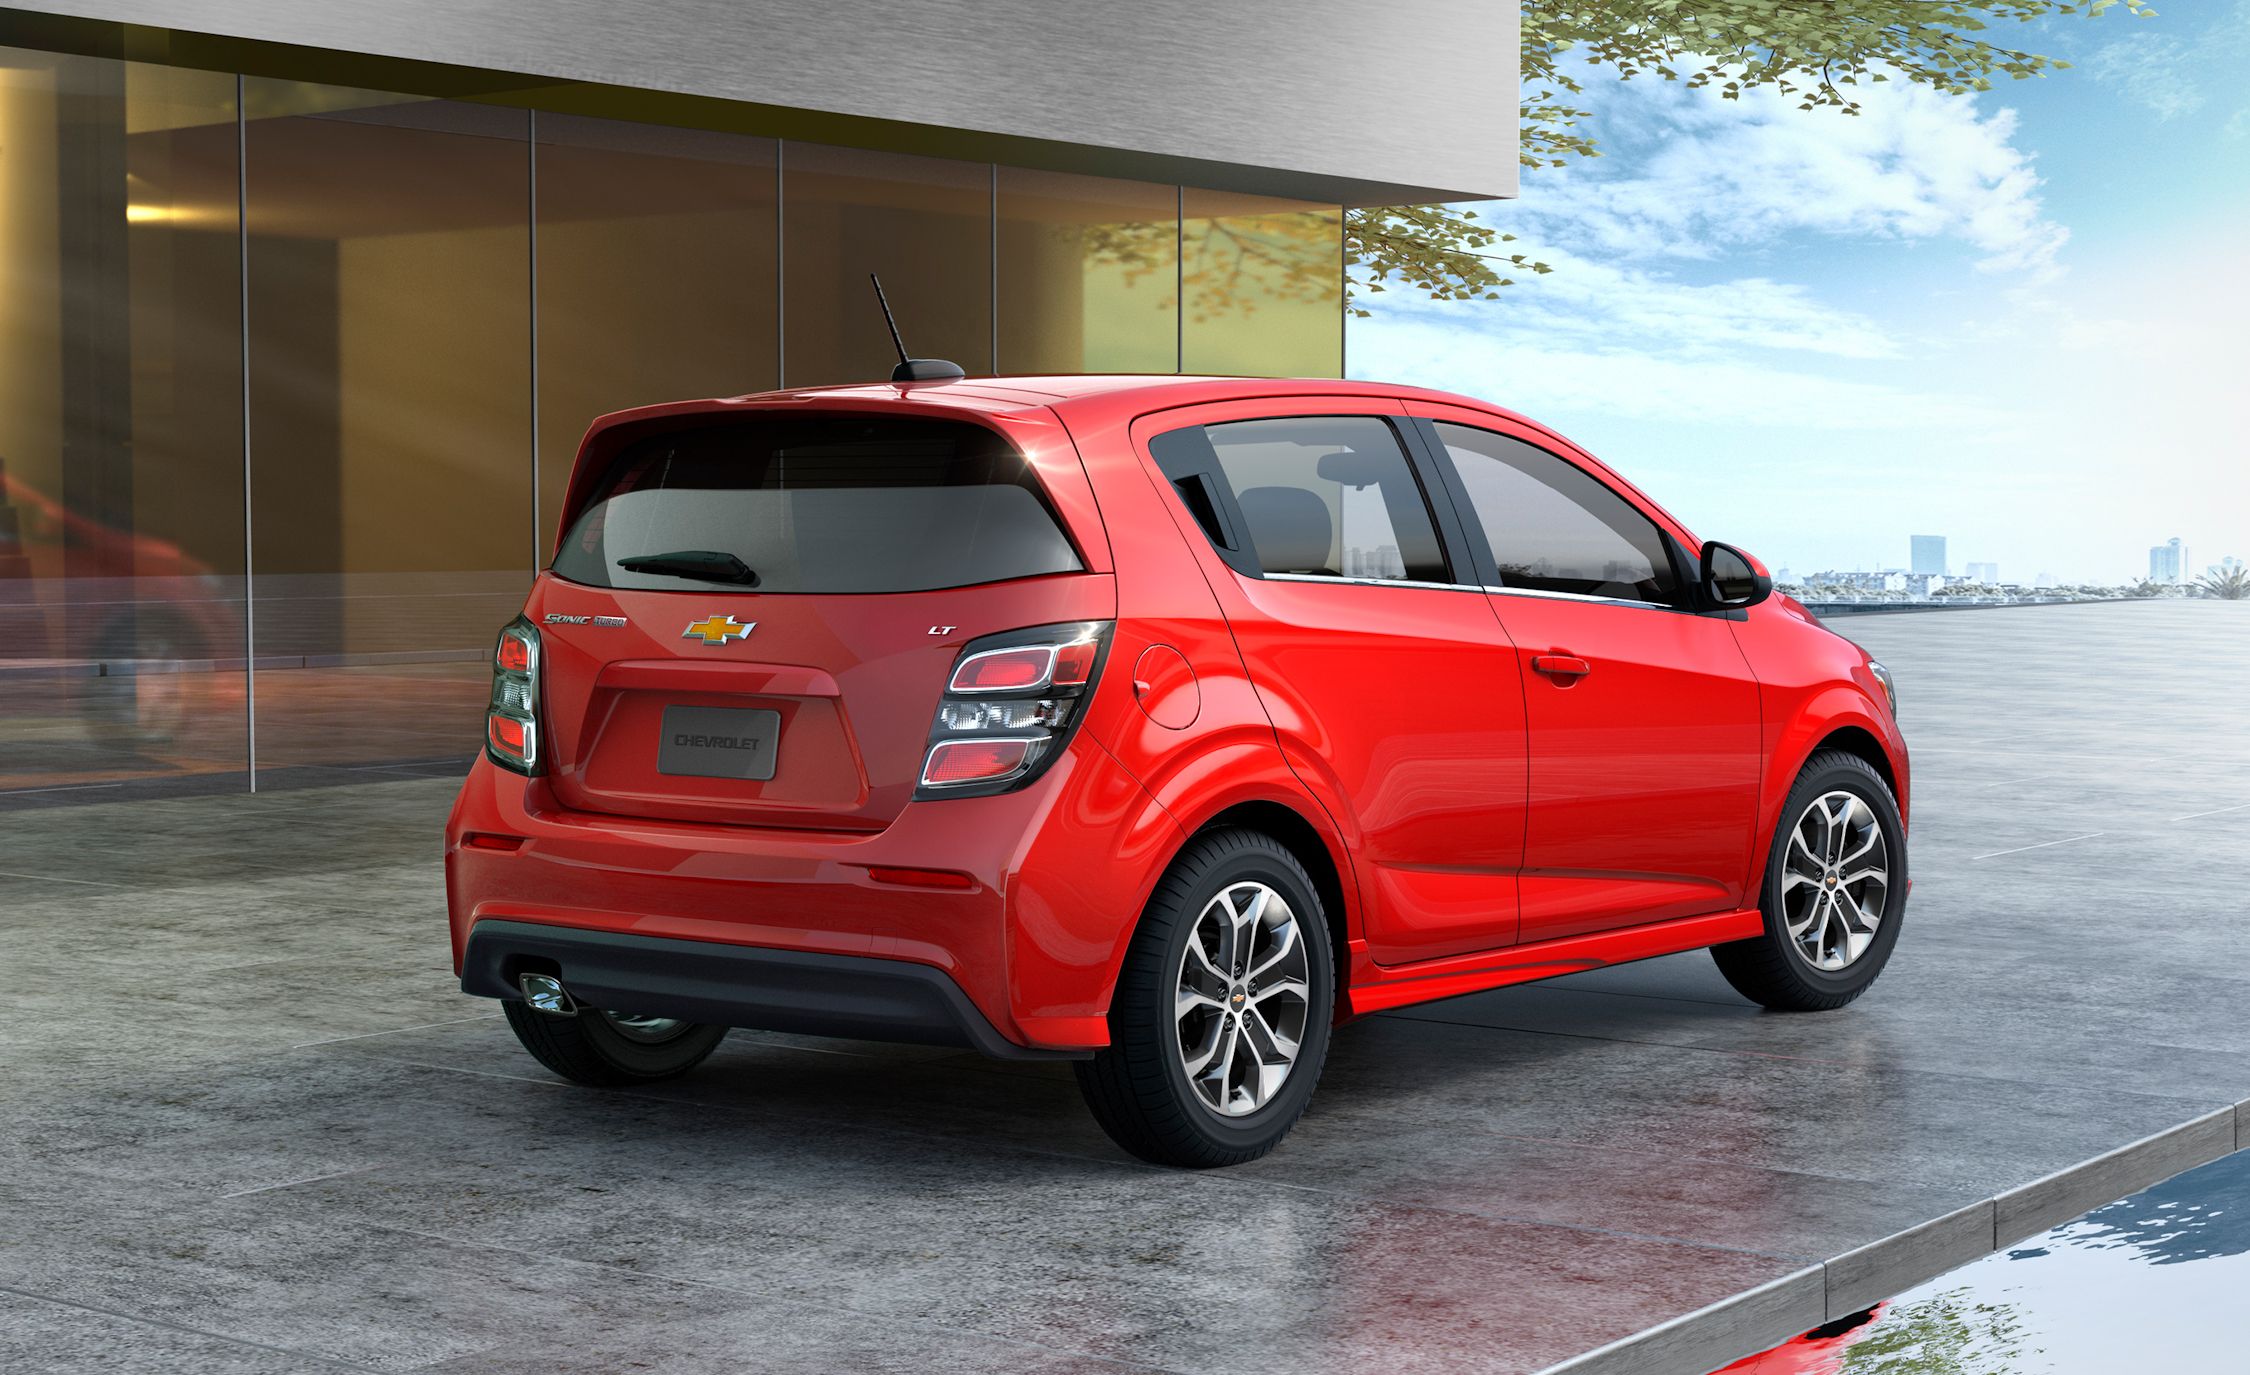 2017 Chevrolet Sonic Review, Pricing, and Specs